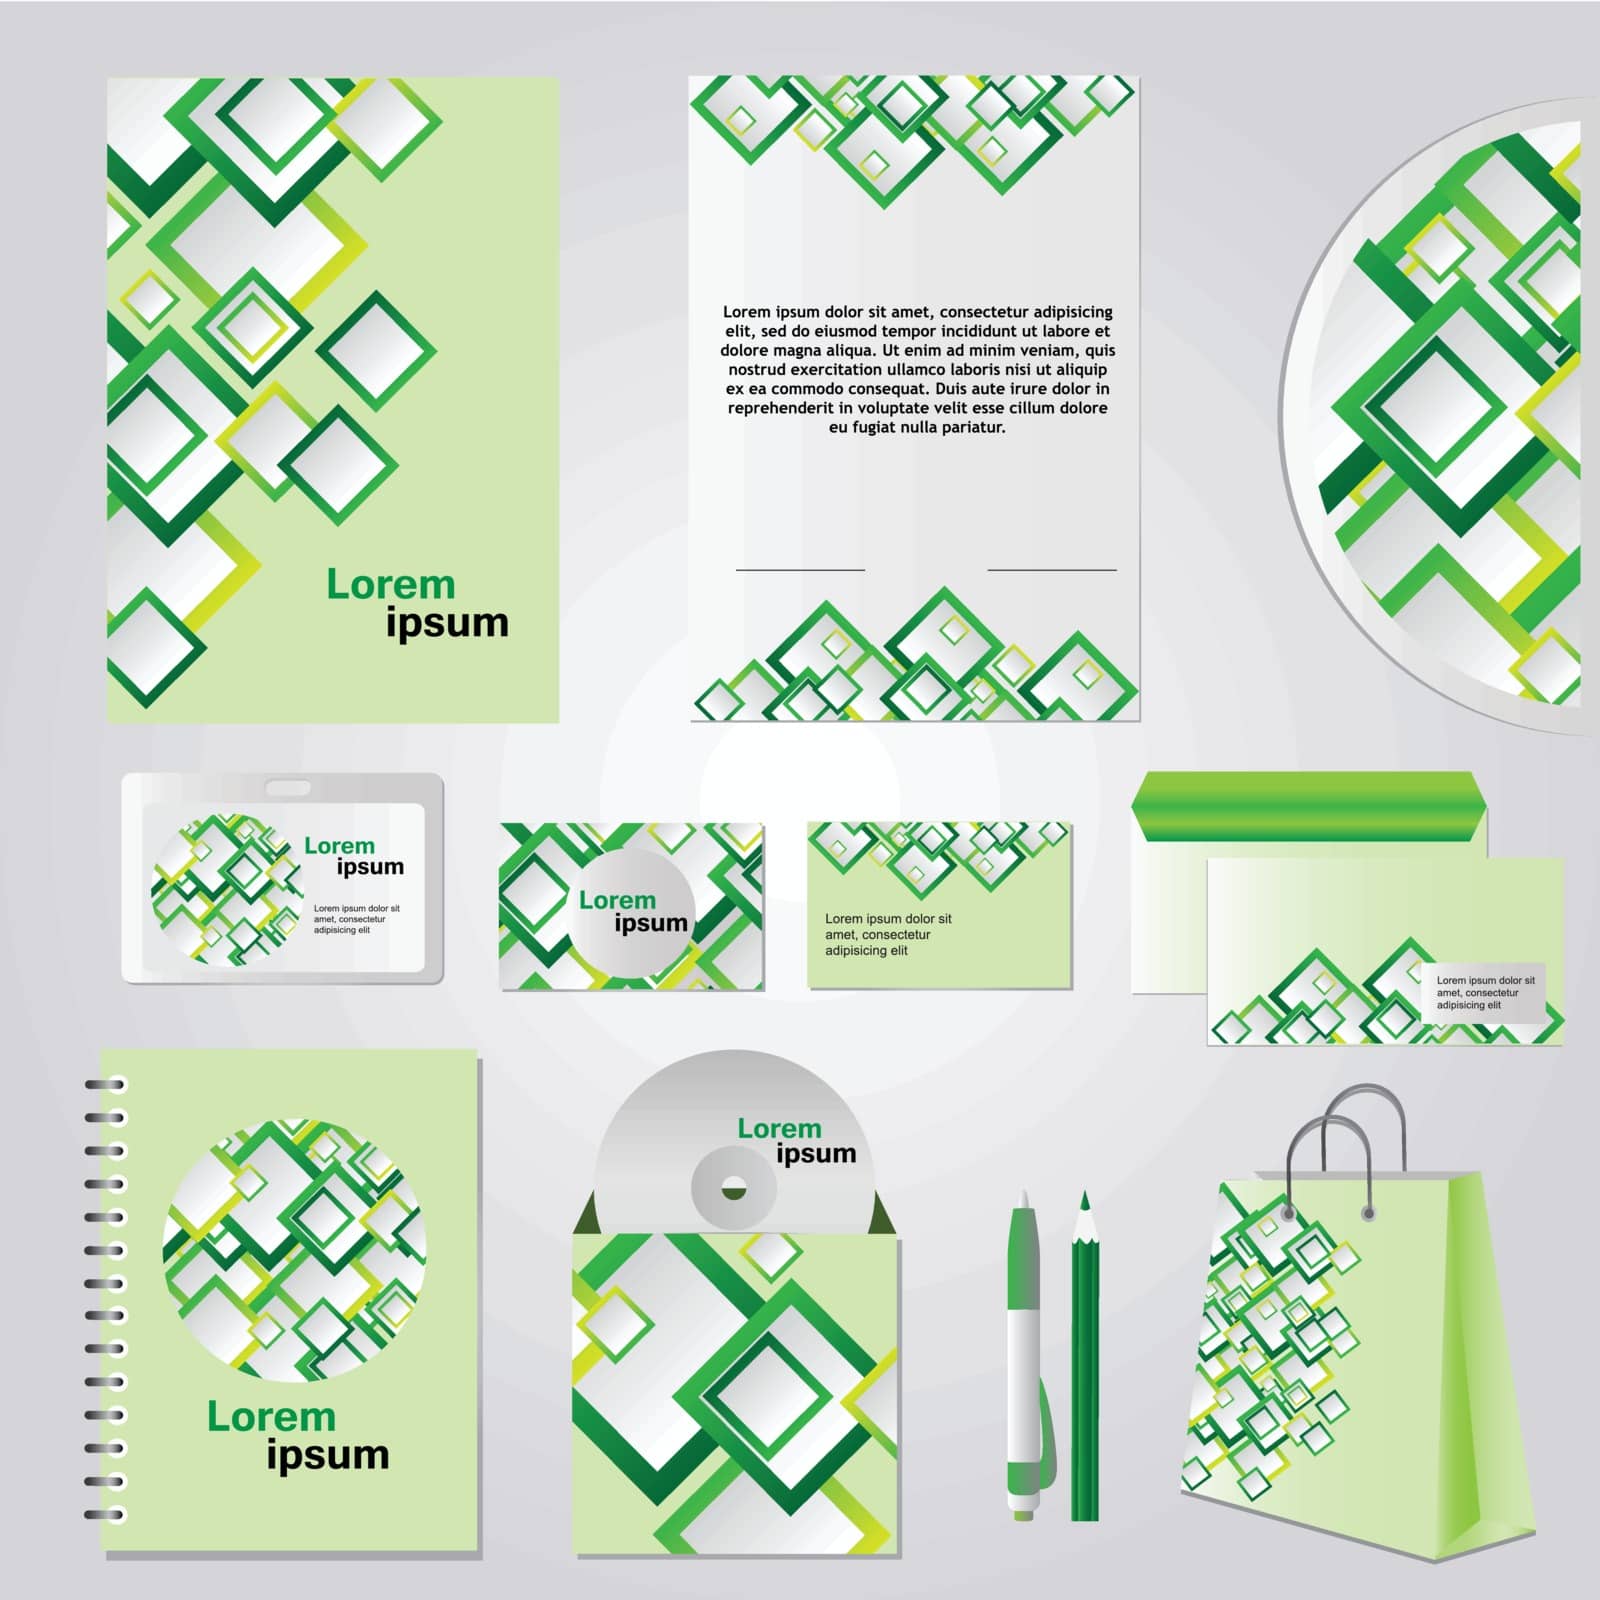 Green corporate style - Corporate Identity set - vector